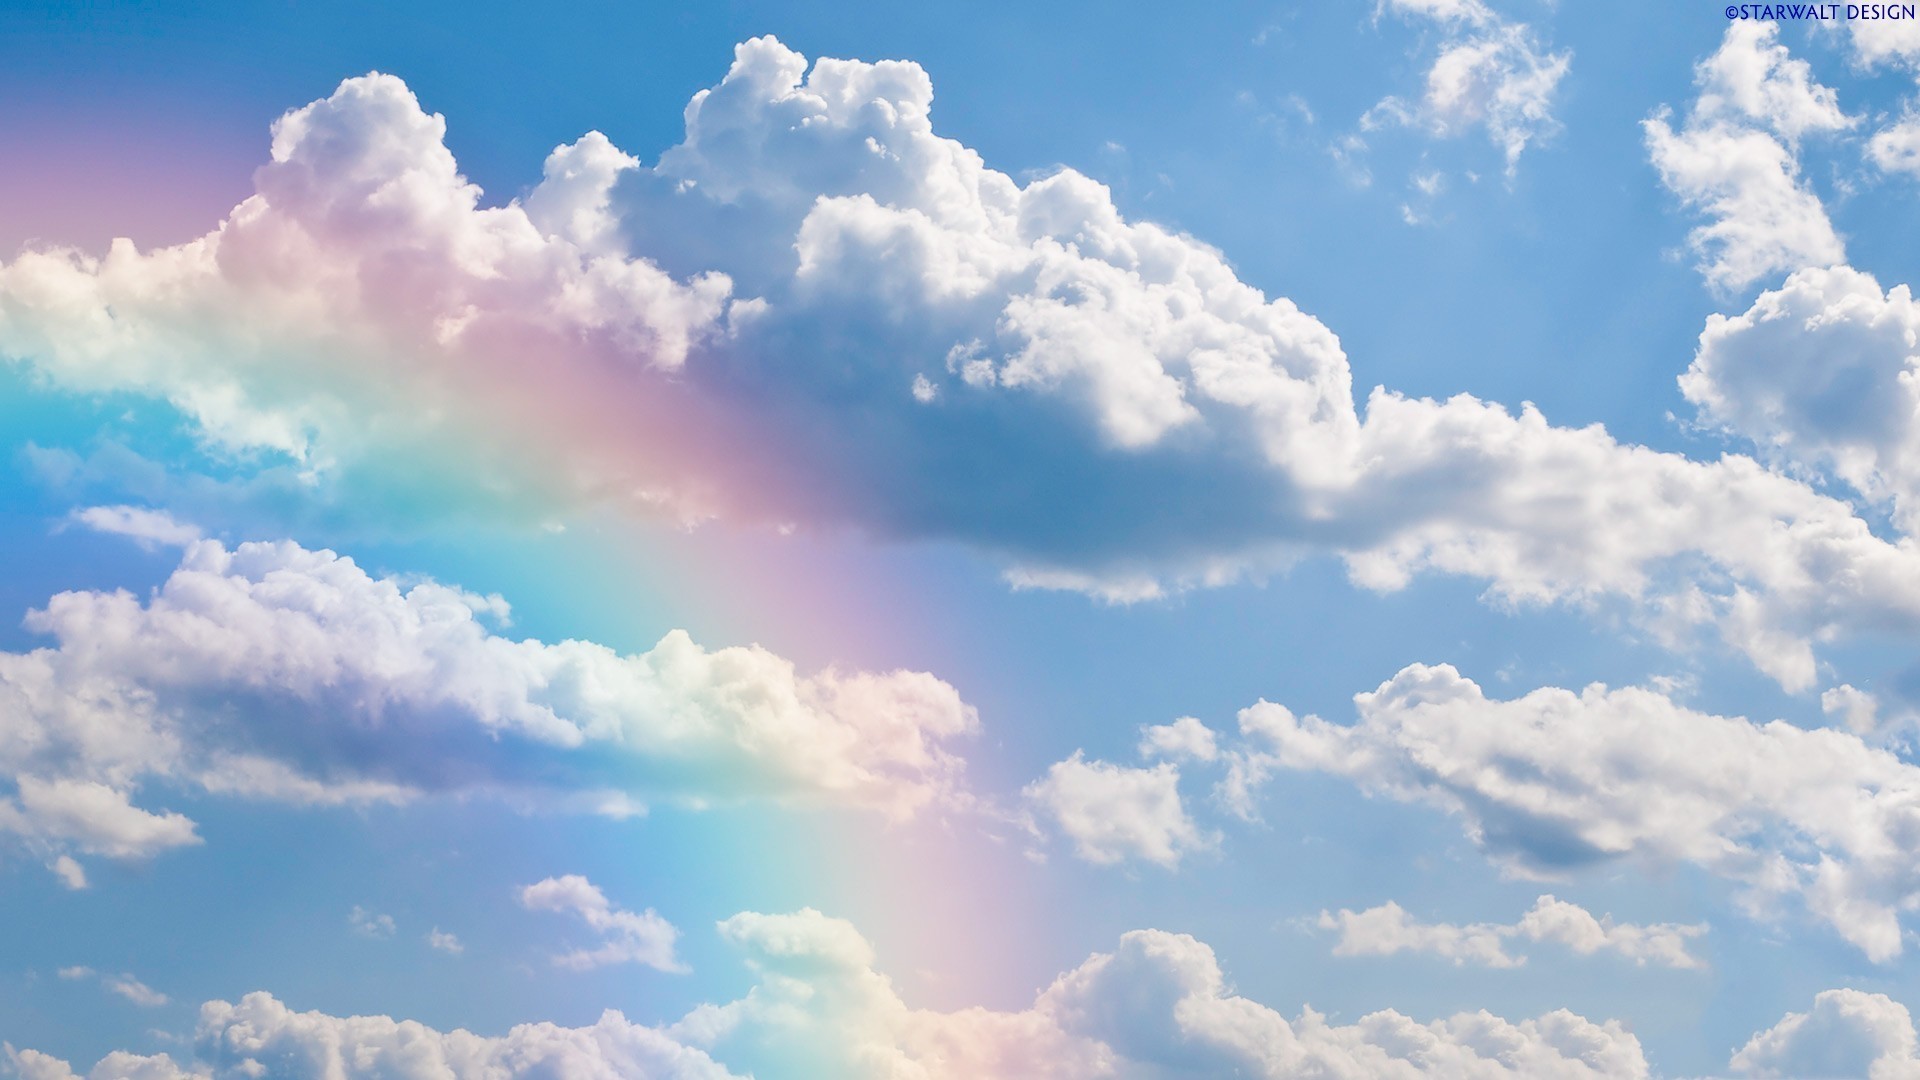 Clouds Design Wallpaper Rainbows Skyscapes